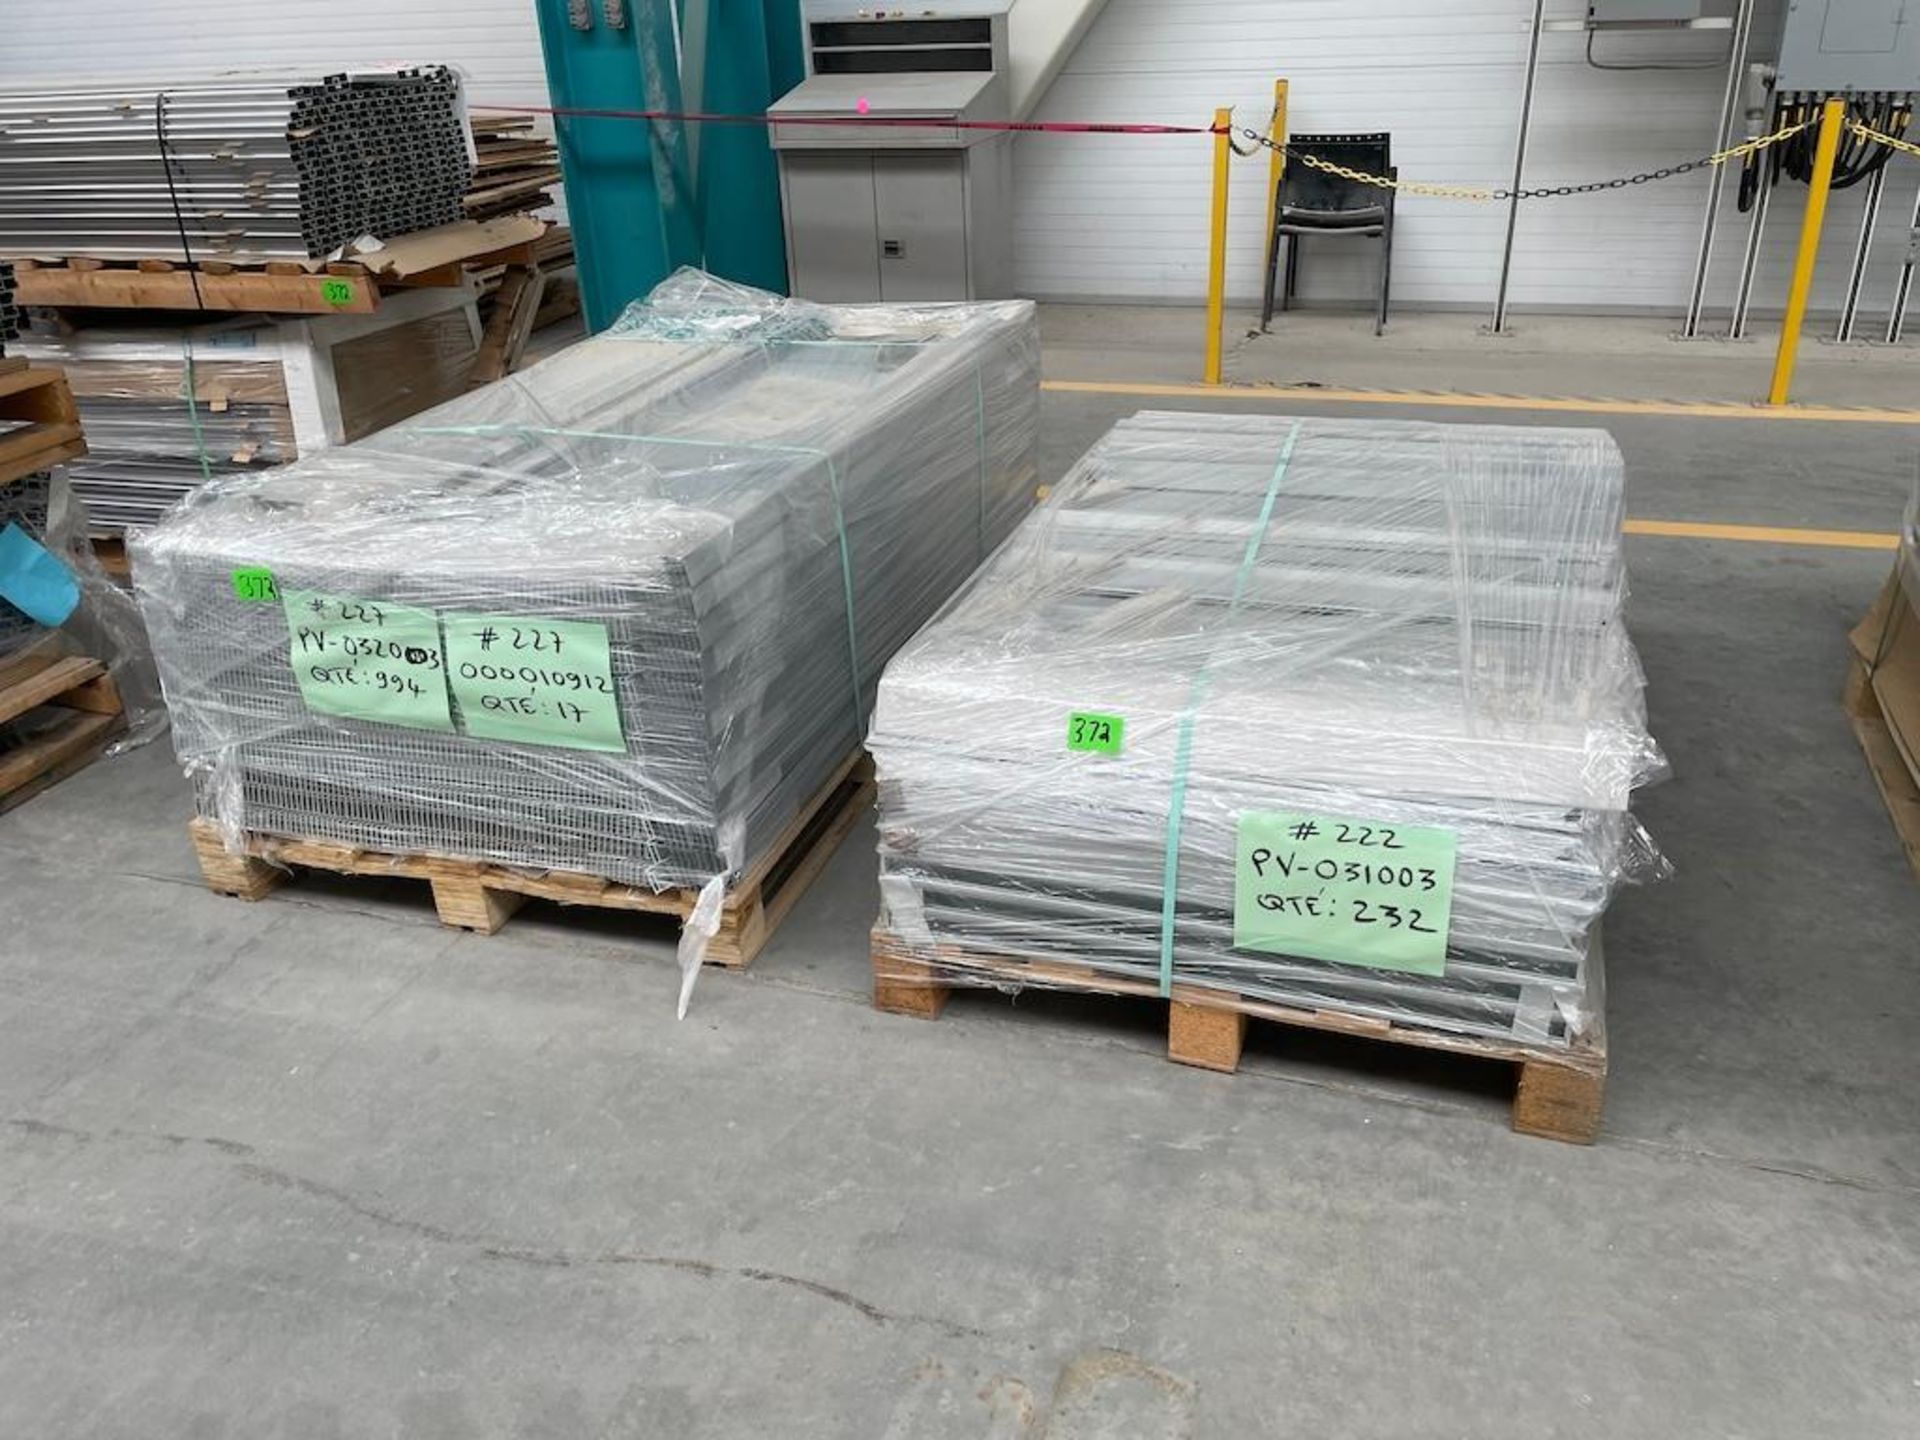 LOT (26) SKIDS ALUMINUM EXTRUSIONS, SOME SKIDS UP TO 470 KG AND 28 FT LONG [MATANE] *PLEASE NOTE, EX - Image 8 of 40